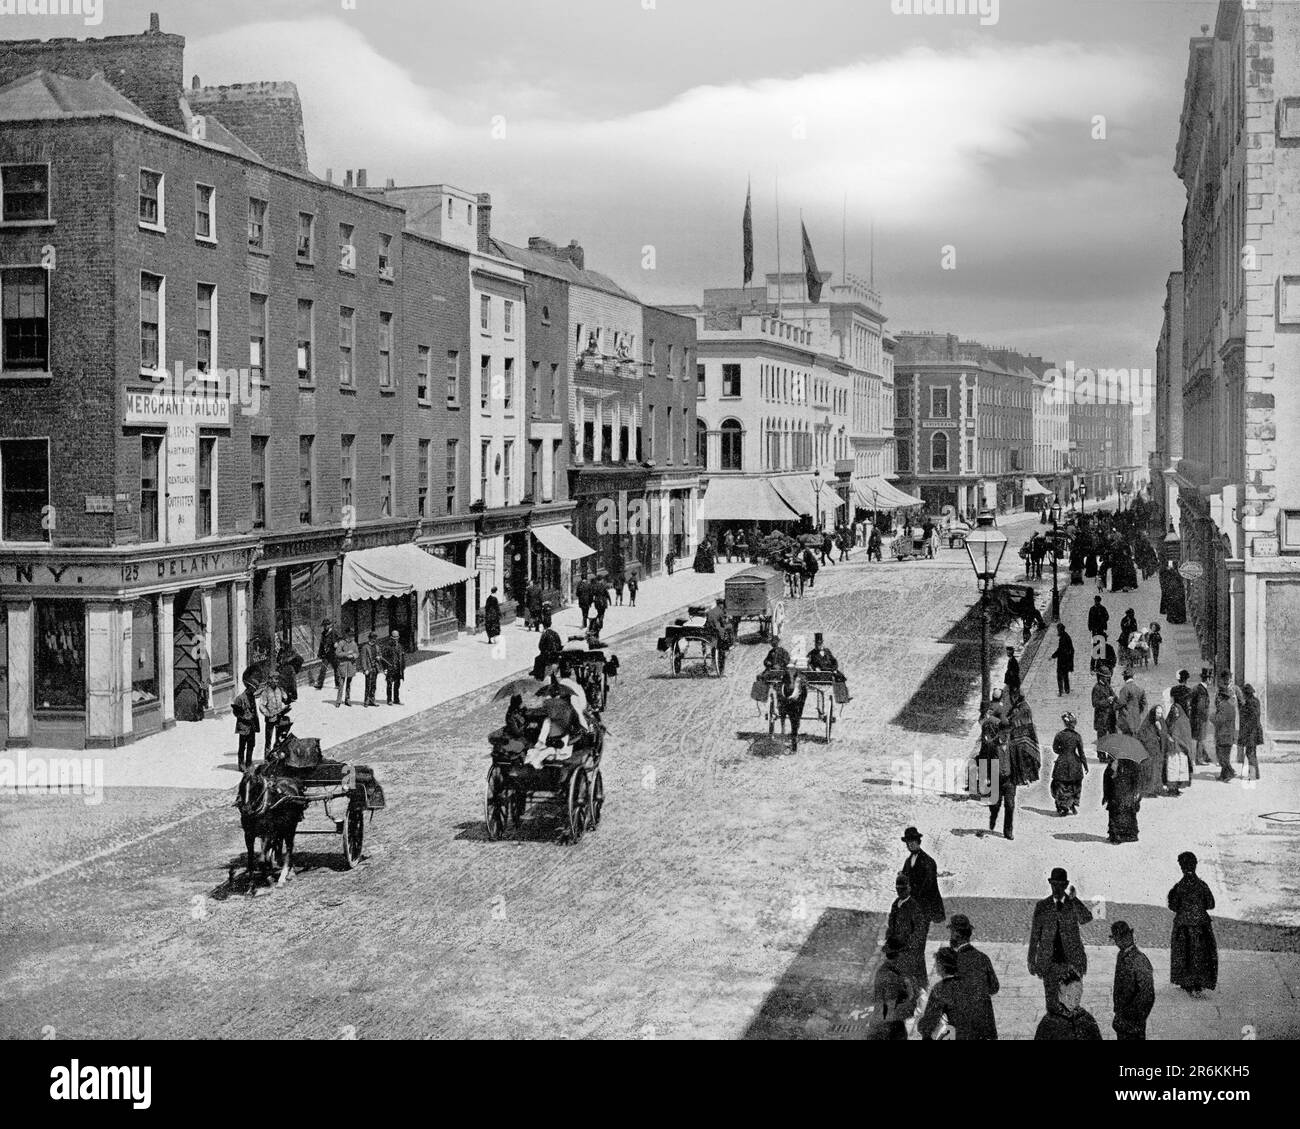 A late 19th century view of George's Street, the main thoroughfare of the city of Limerick, later renamed O'Connell Street after Daniel O'Connell. It dates from the late 18th to early 19th century as part of Edmund Sexton Pery's plan for the development of a new city on lands he owned to the south of the existing medieval city. In 1765, he commissioned the engineer Davis Ducart to design a town plan on those lands which have since become known as Newtown Pery. The centrepiece of this development was O'Connell Street, now part of Limerick's Georgian Quarter. Stock Photo